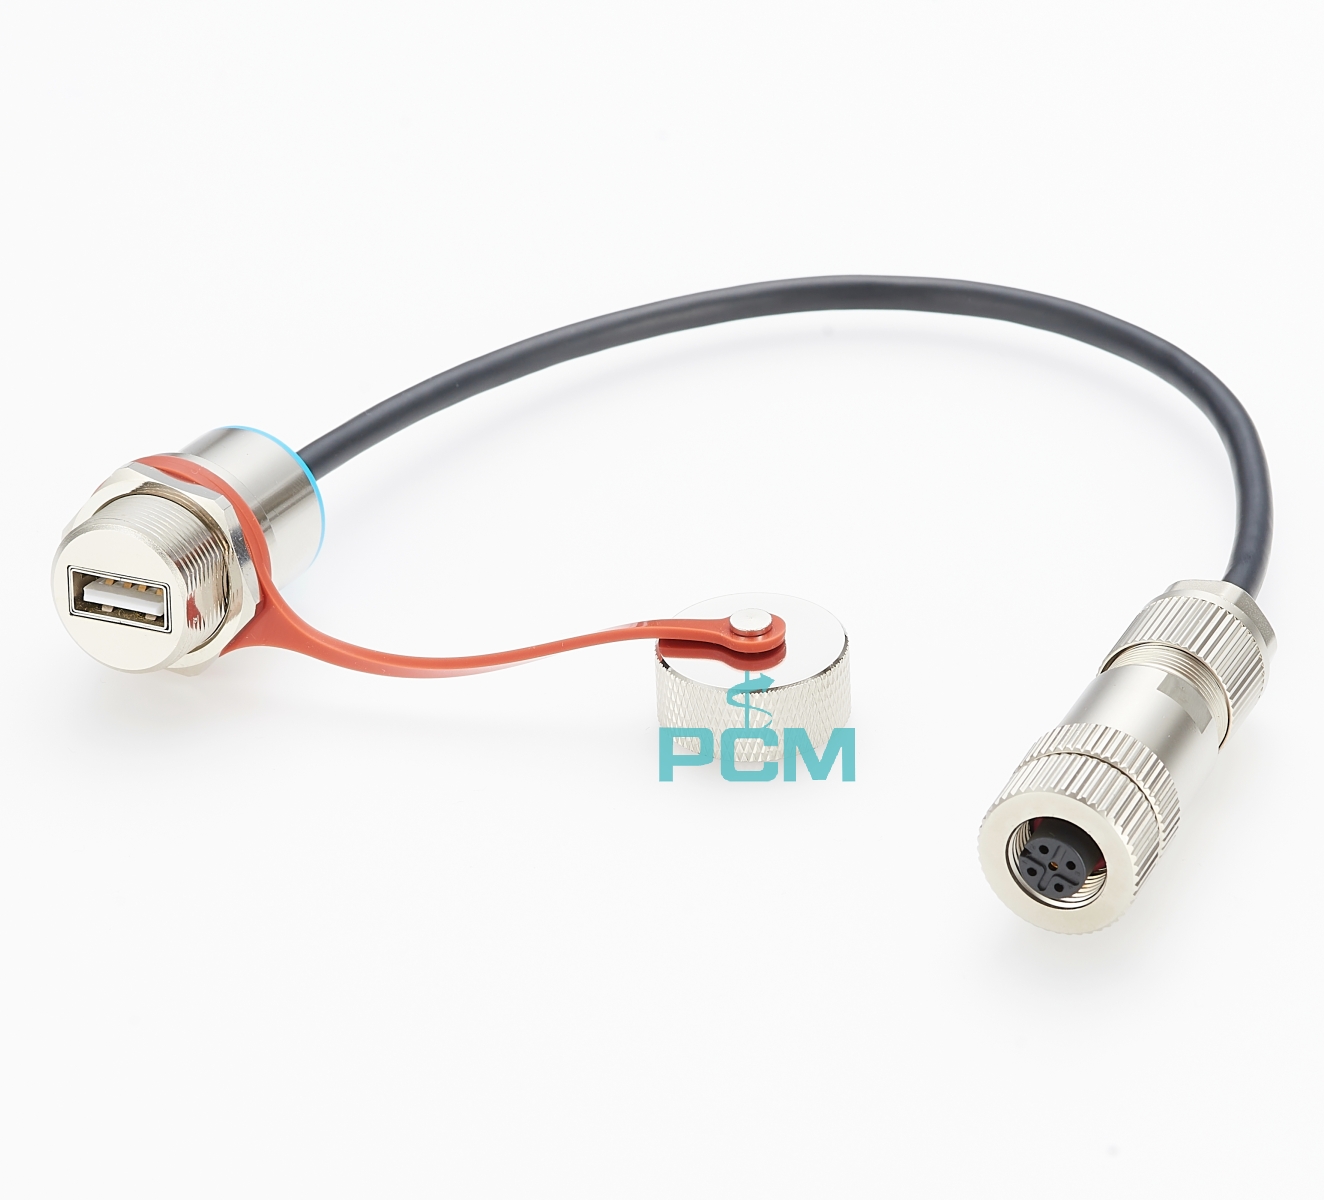 M12 USB connection cable for use in factory automation